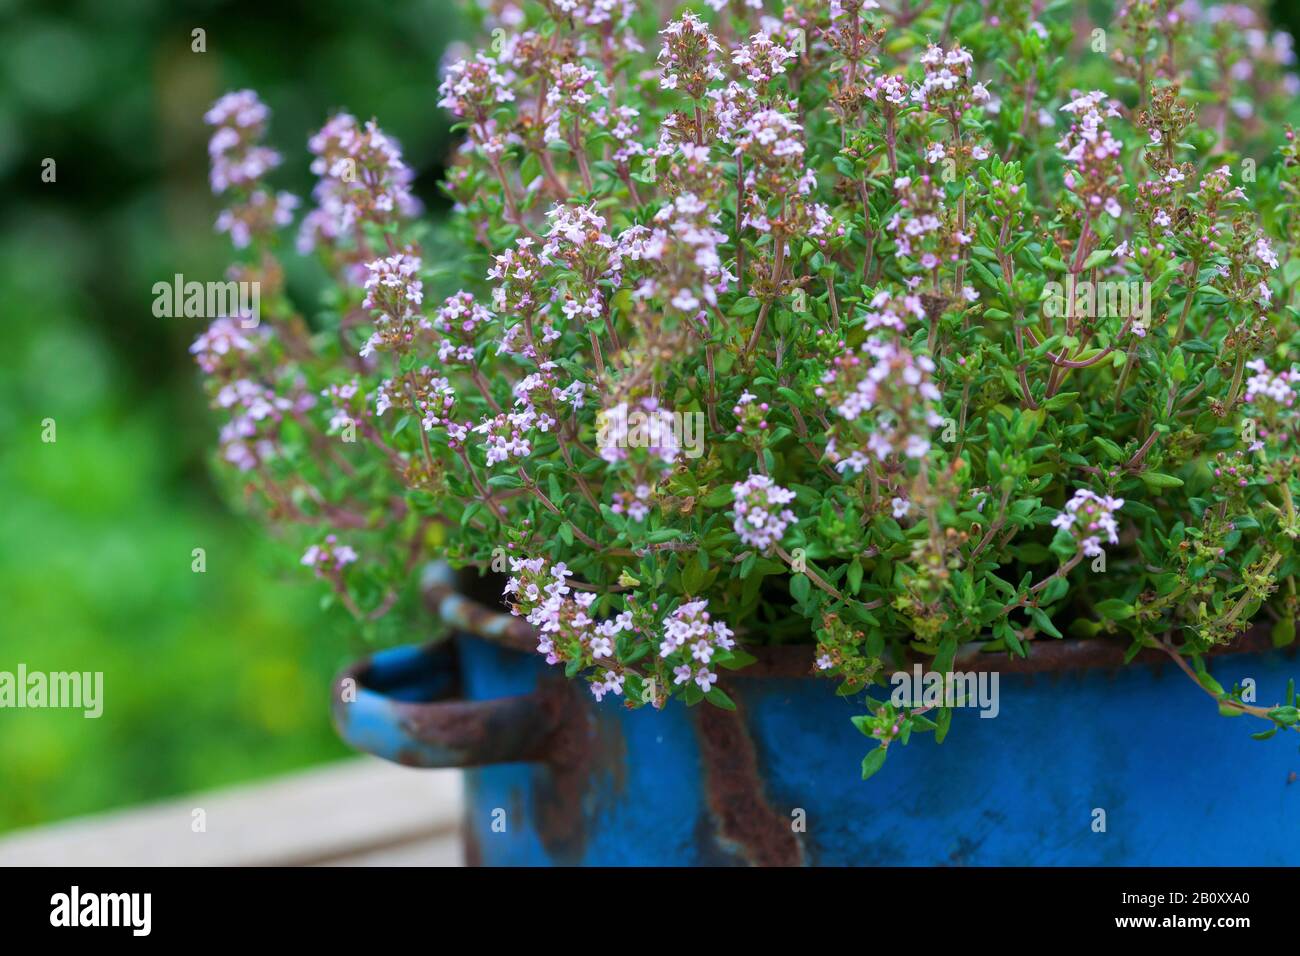 Garden thyme, English thyme, Common thyme (Thymus vulgaris), blooming in a pot, Germany Stock Photo